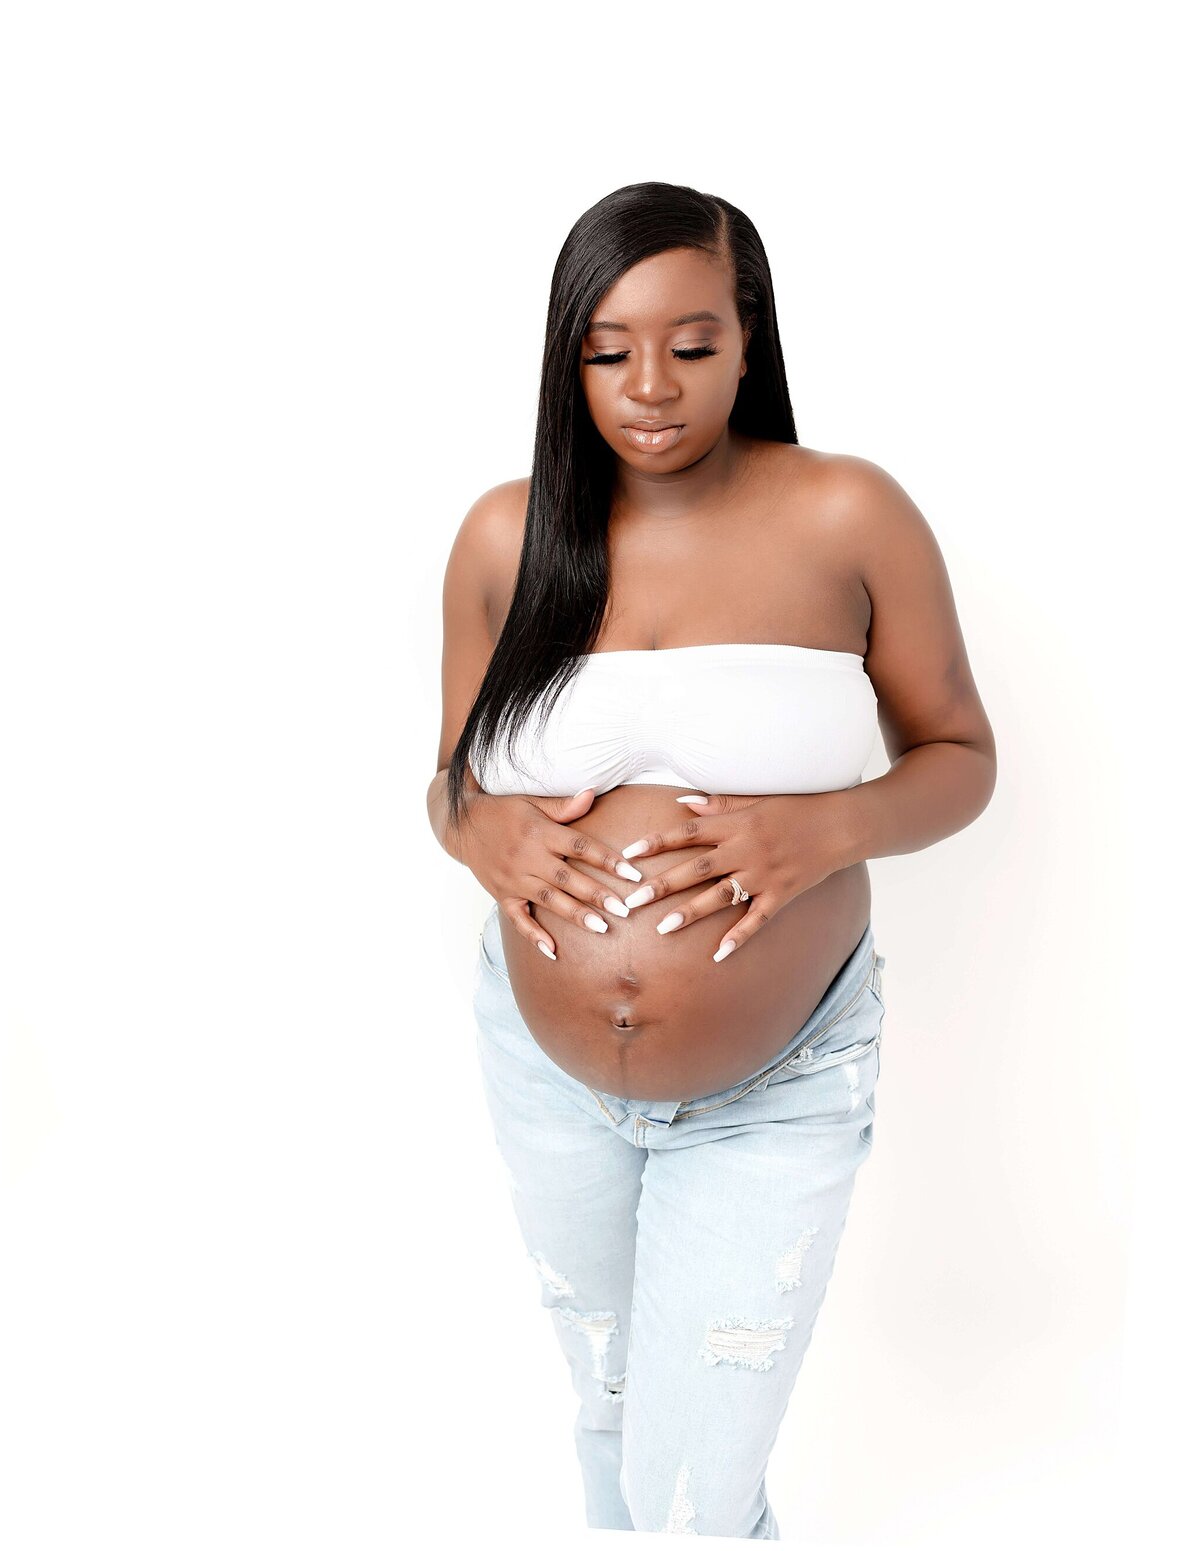 Pregnant woman standing with her hands gently resting on her rounded belly, showcasing the bond between mother and unborn child. She wears jeans and a tube top.